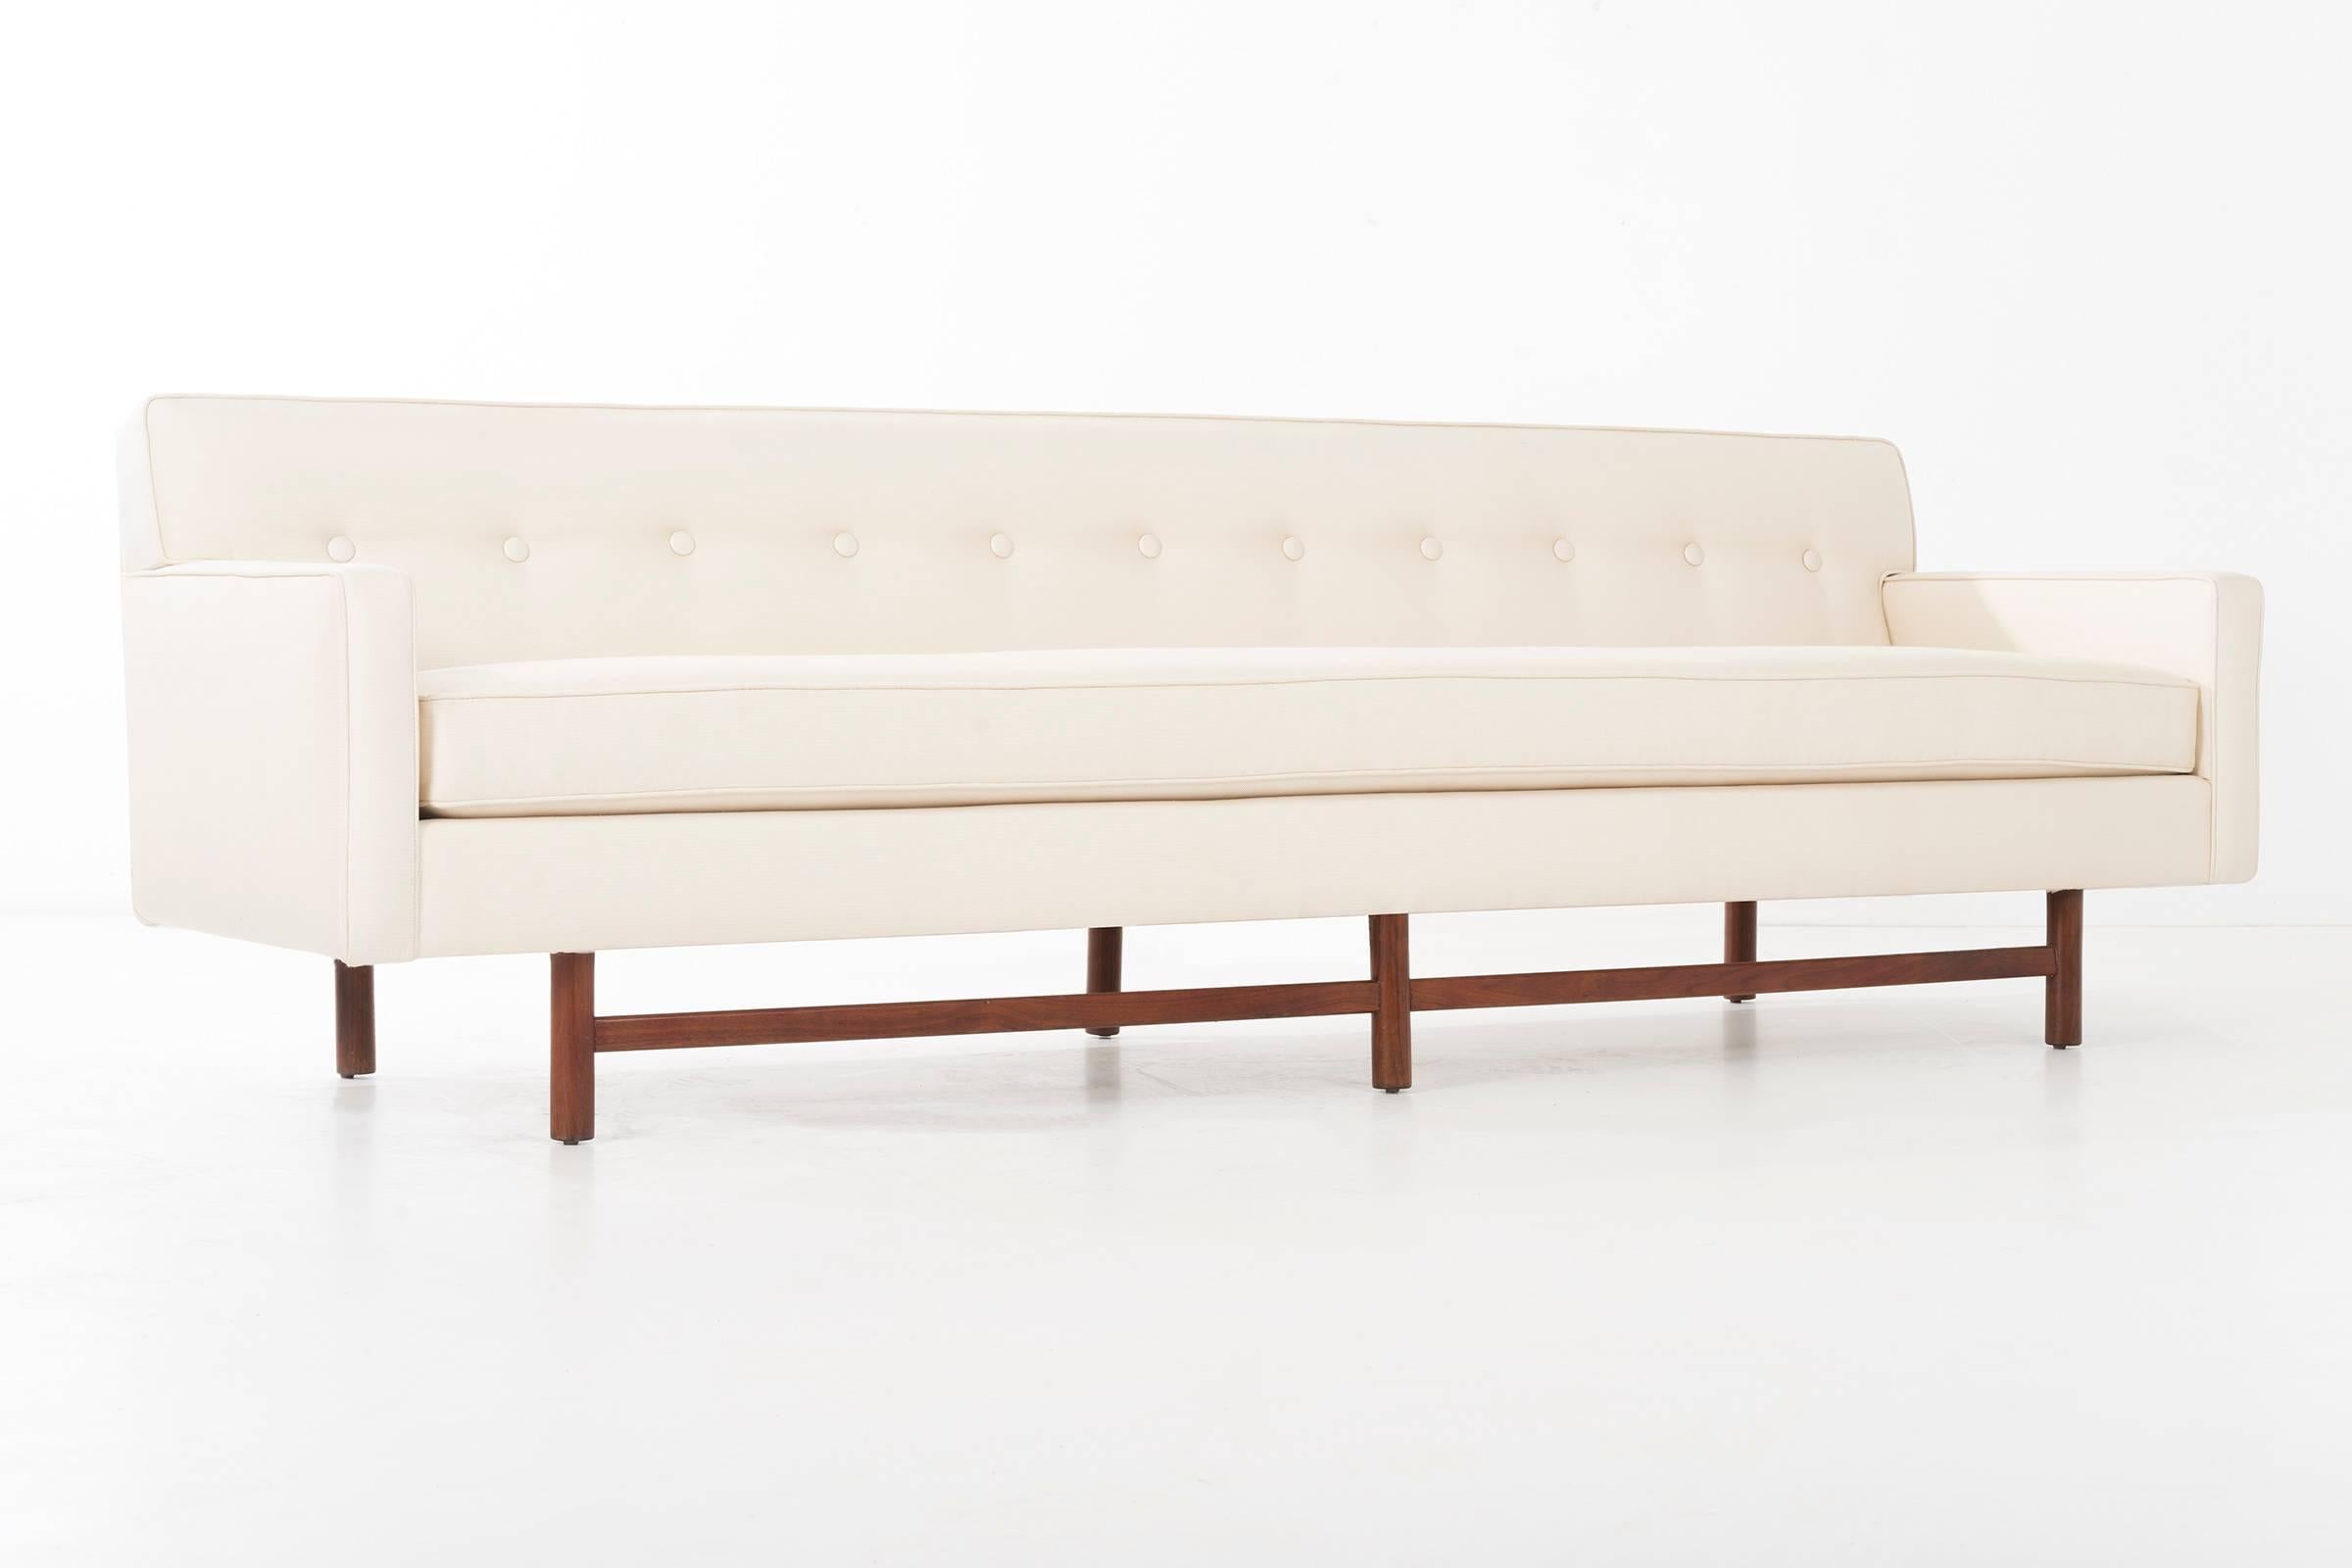 Probber for Harvey Probber Inc. Tuxedo sofa, features seven tufted button back with lumbar support across the length. Single deck cushion, rebuilt and restored, new foam with Great Plains cotton/poly blend fabric.
Solid walnut legs with front